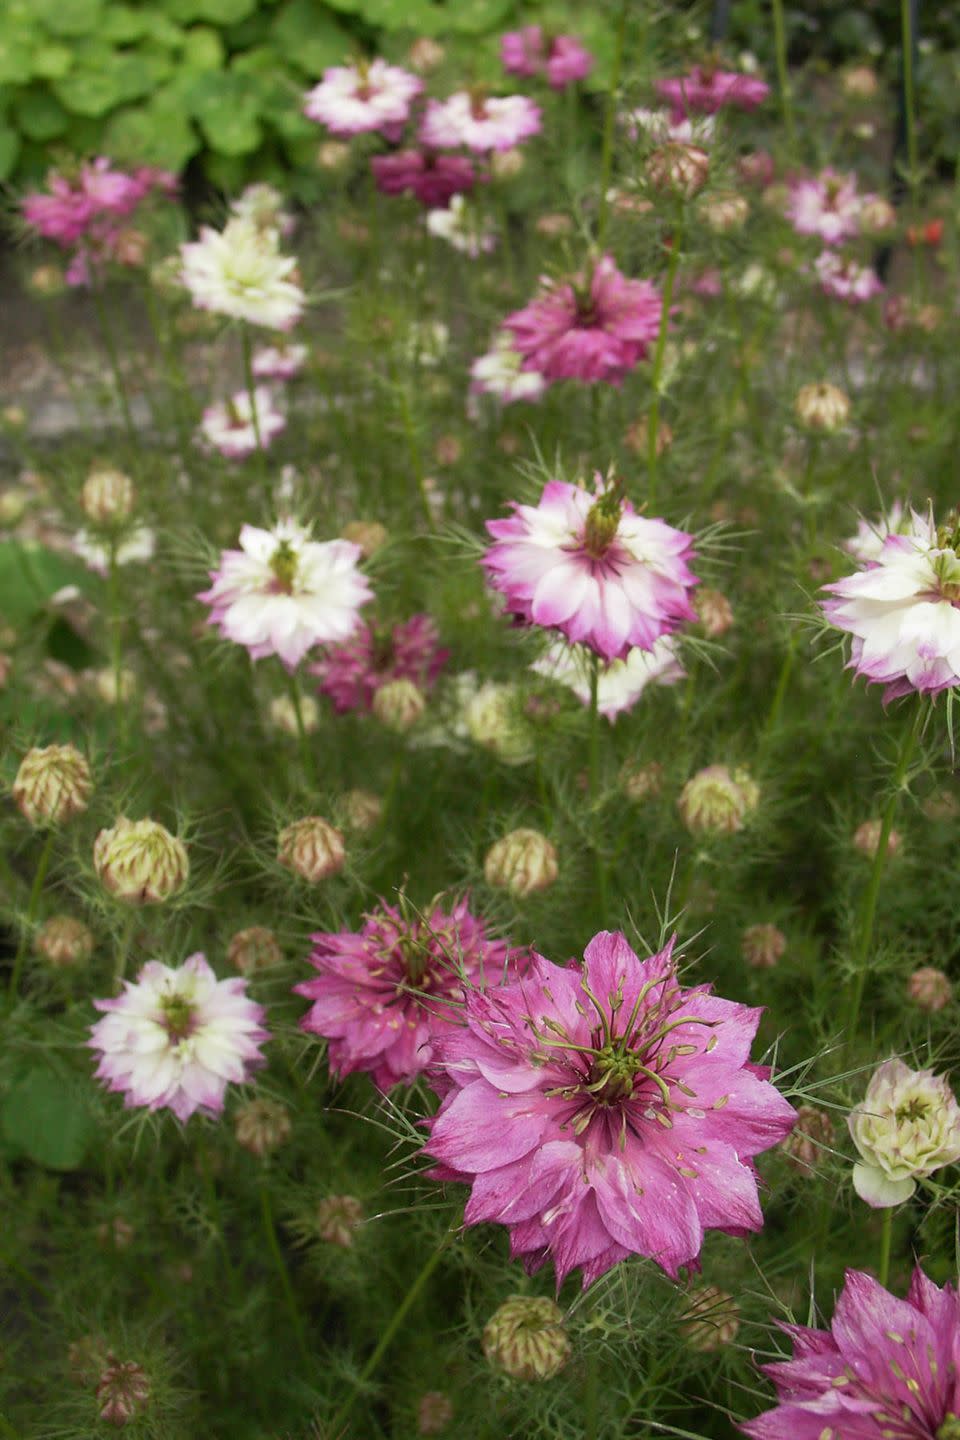 Flower, Flowering plant, Plant, Petal, Garden cosmos, Wildflower, Daisy family, Annual plant, Pink family, Dianthus, 